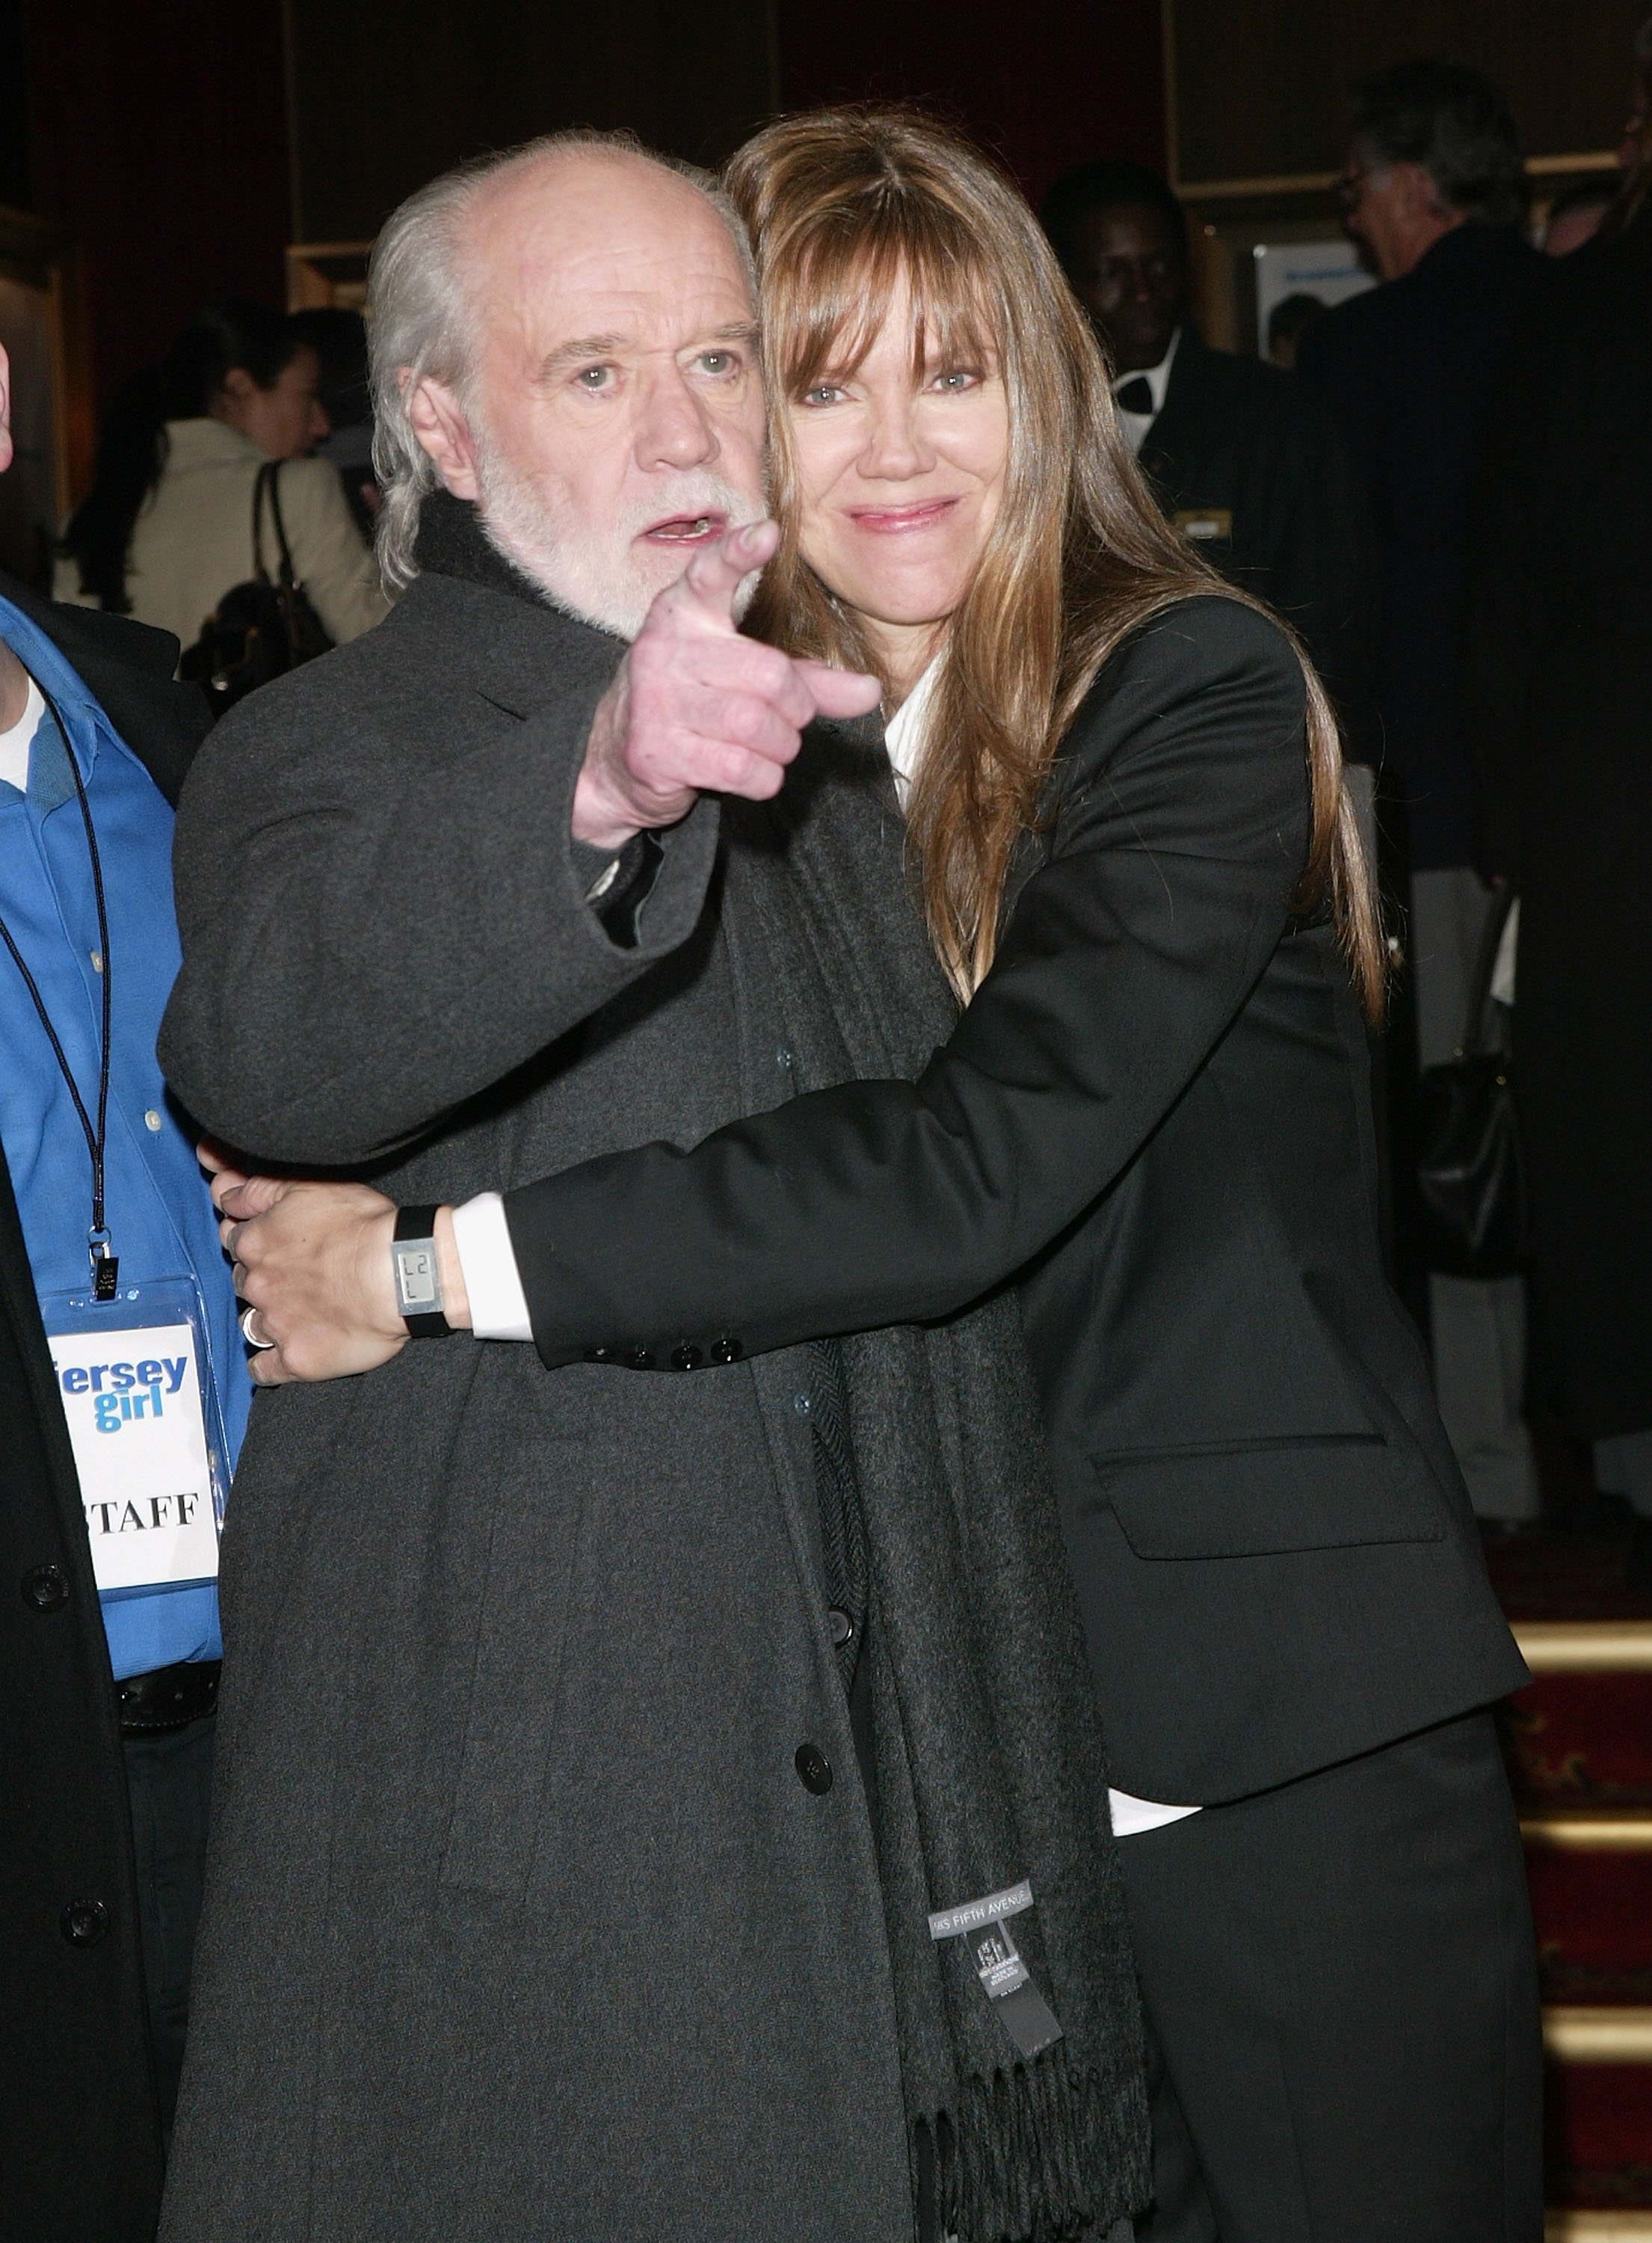 Comedian George Carlin and wife Sally Wade attend the "Jersey Girl" film premiered on March 9, 2004 at the Ziegfeld Theater, in New York City.  |  Source: Getty Images